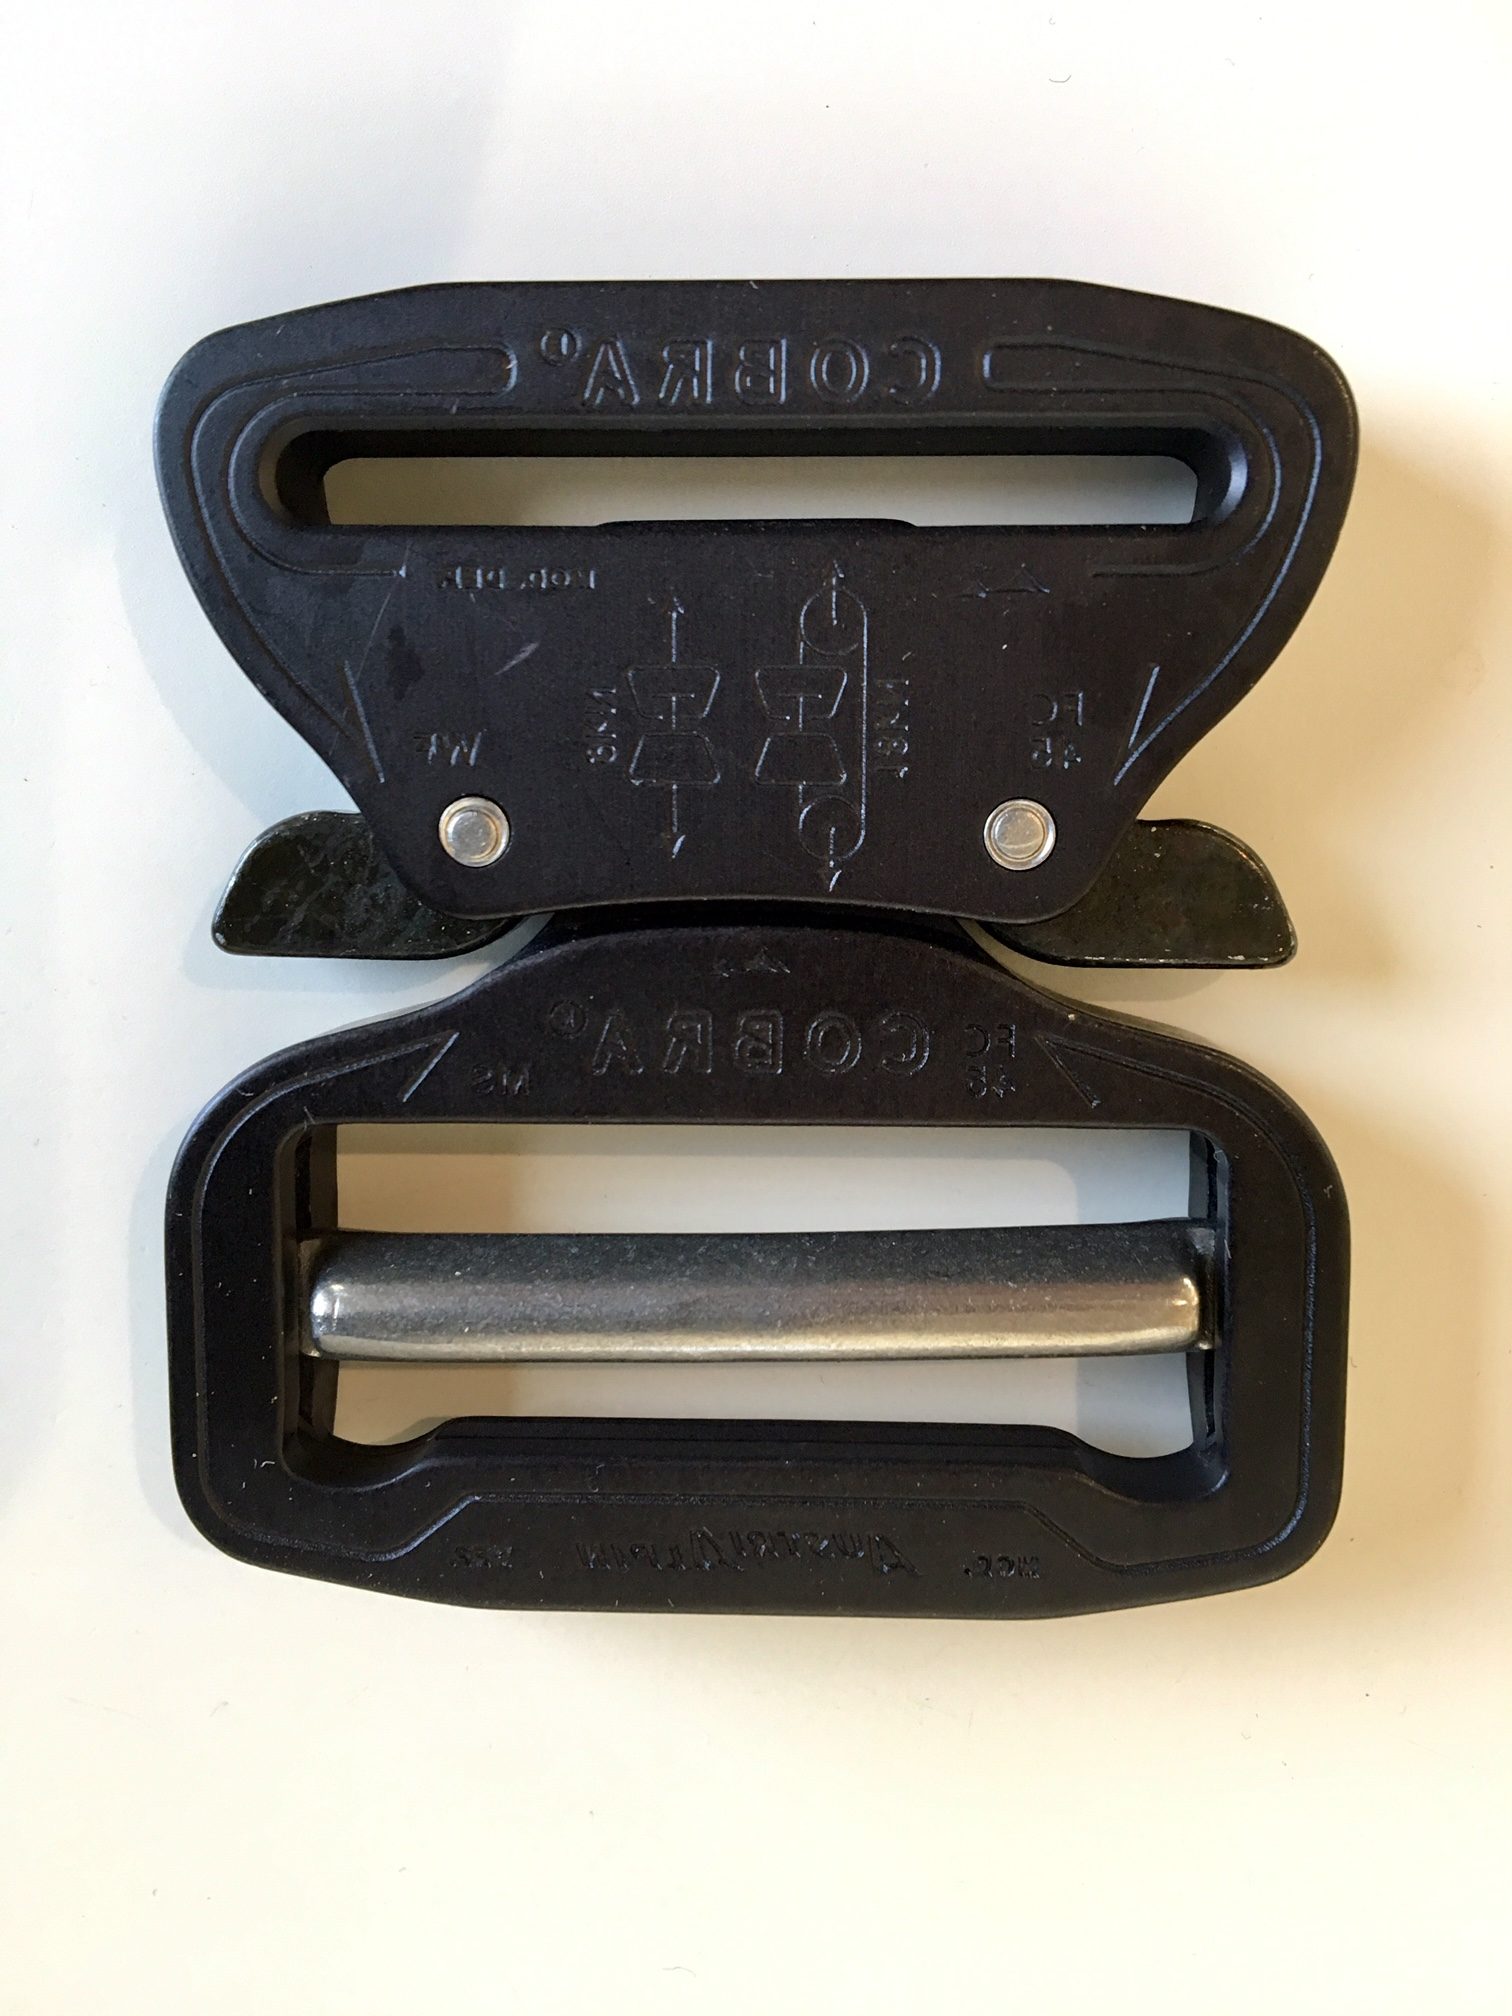 Aluminum Buckle COBRA® PRO STYLE with Metal Tri-glide